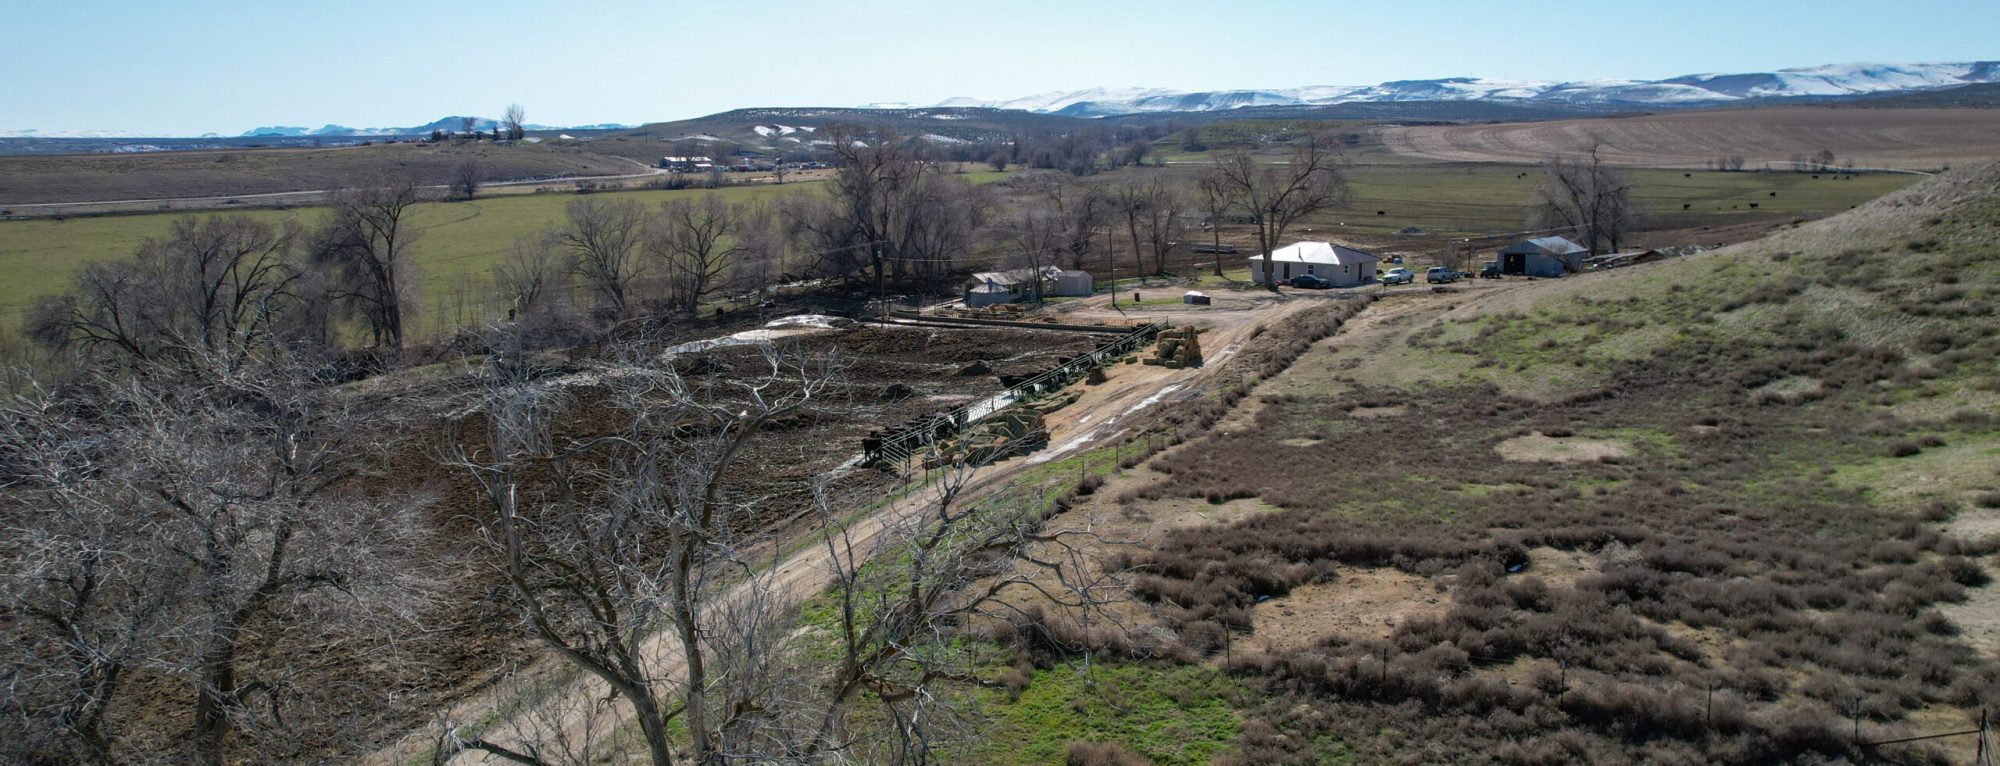 Adrian Cattle Ranch Aerial Overview